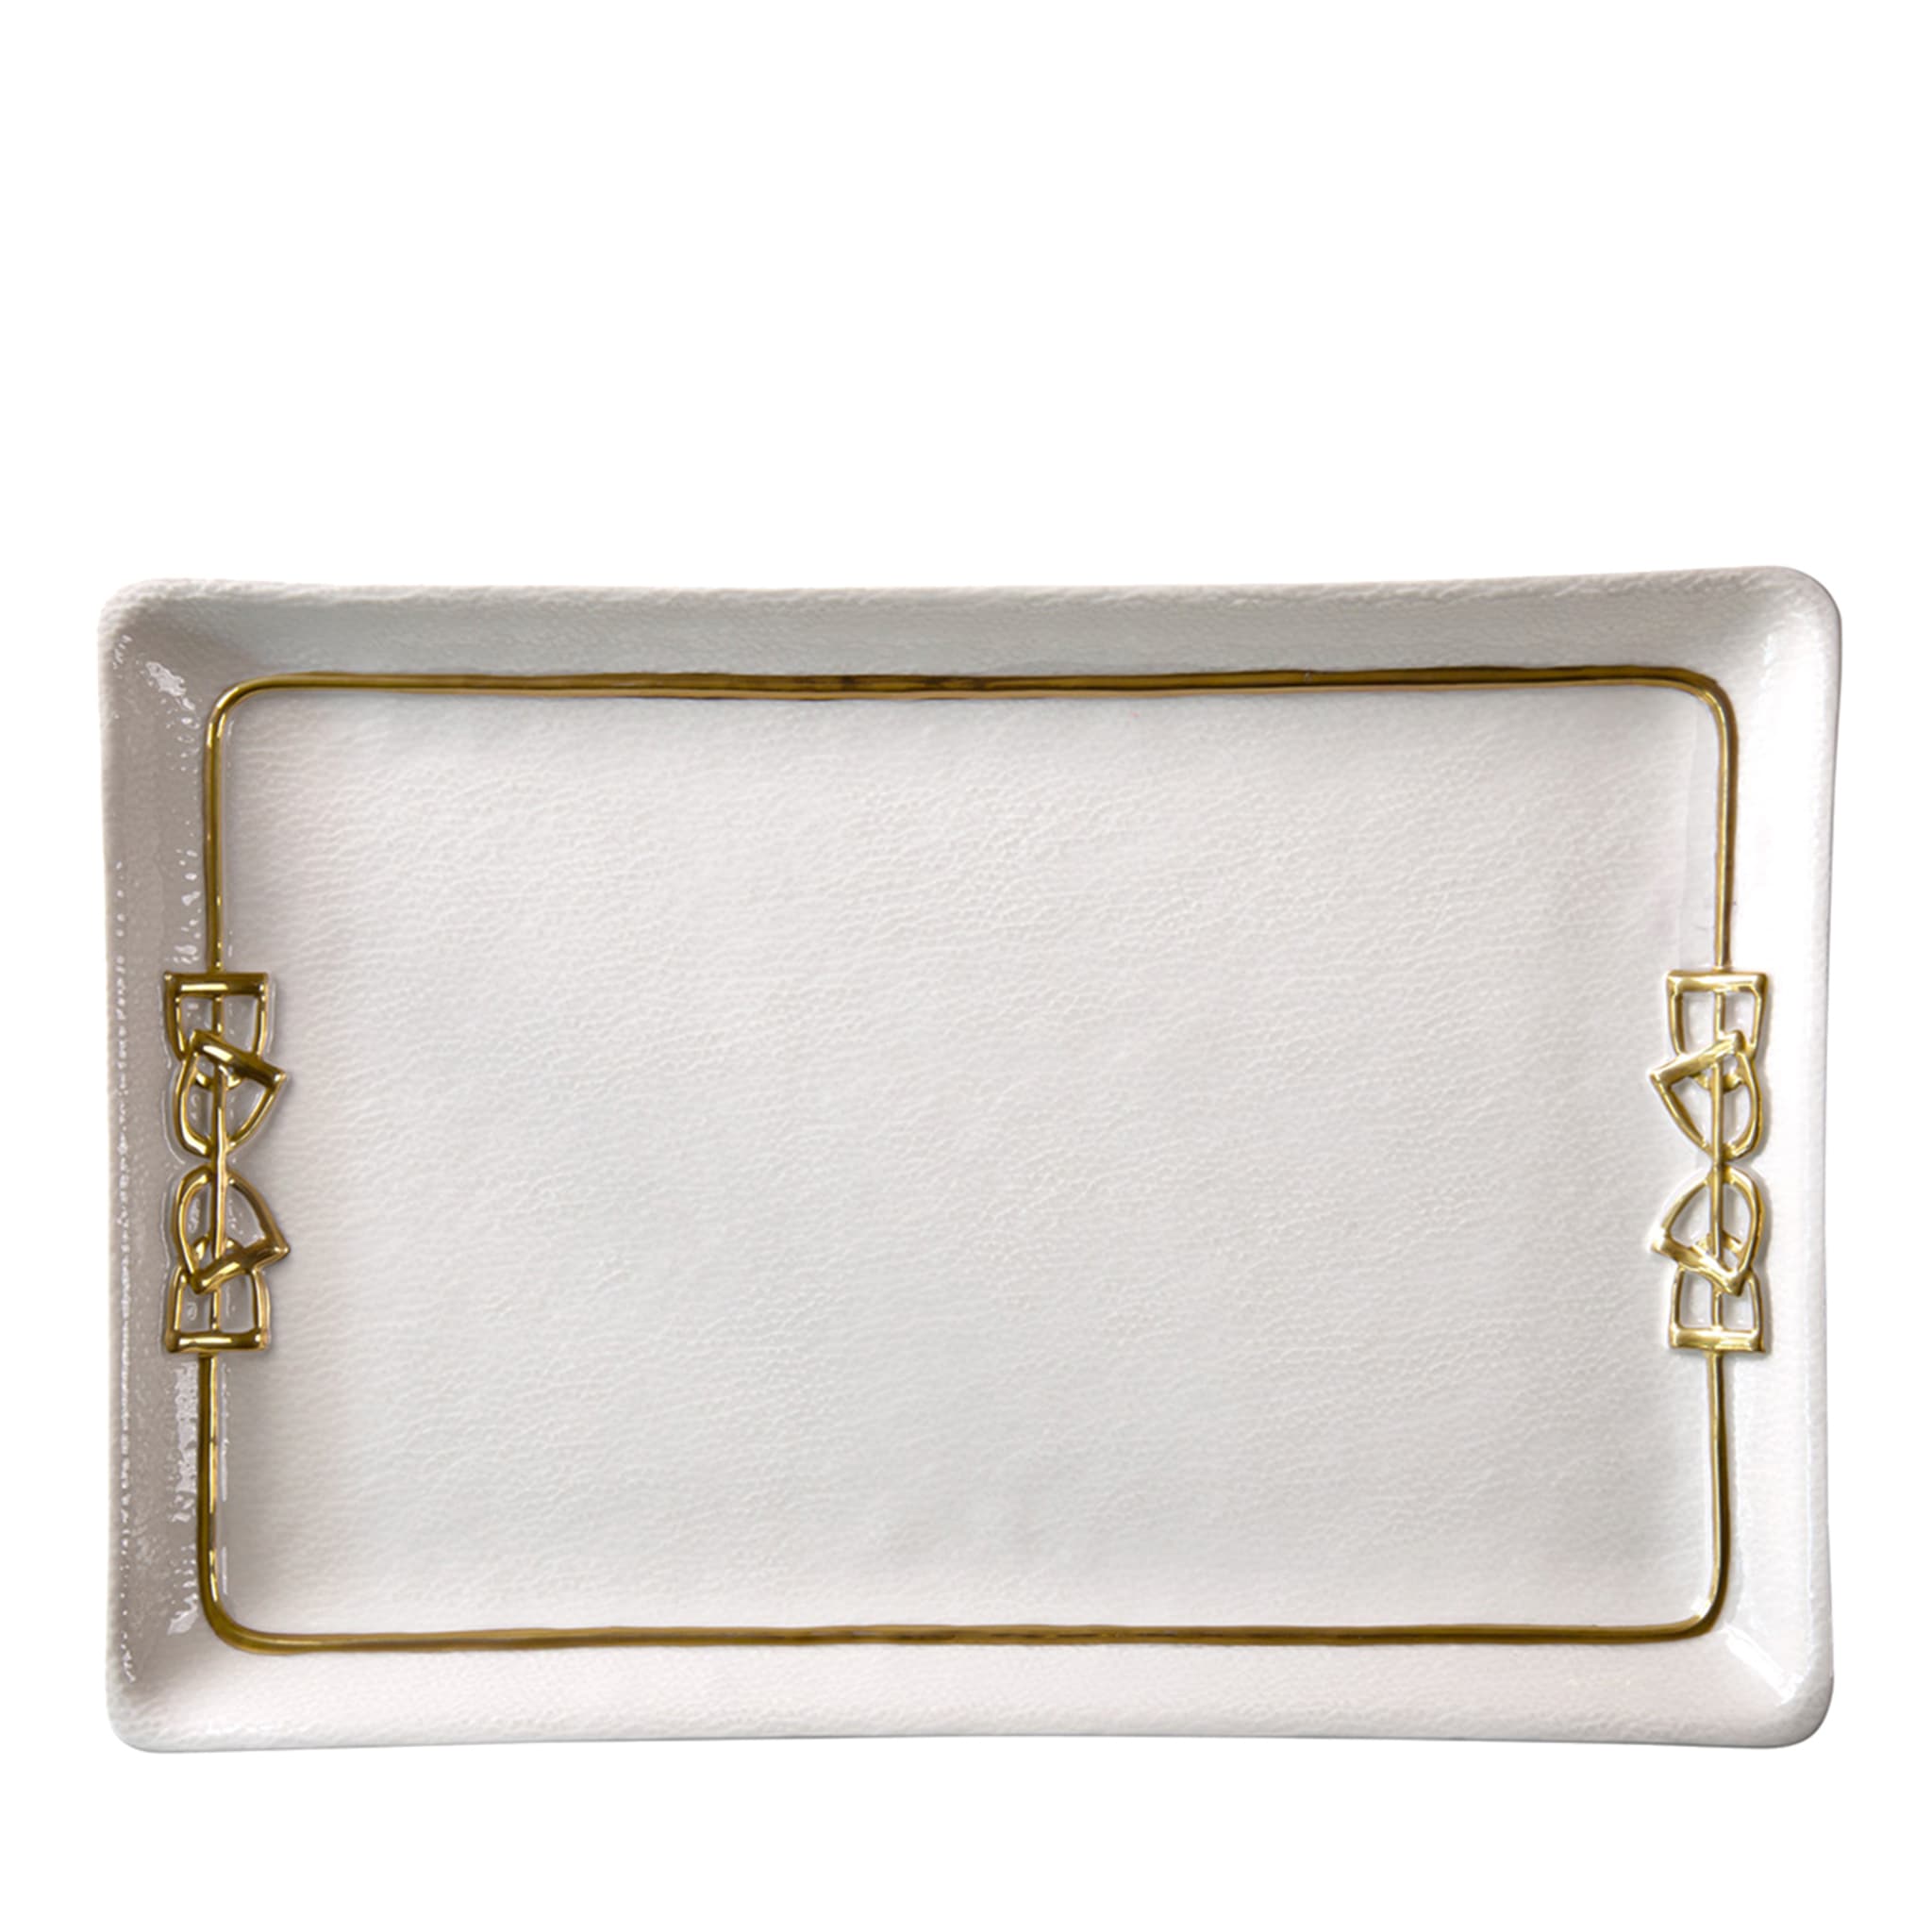 DRESSAGE TRAY - WHITE AND GOLD - Main view